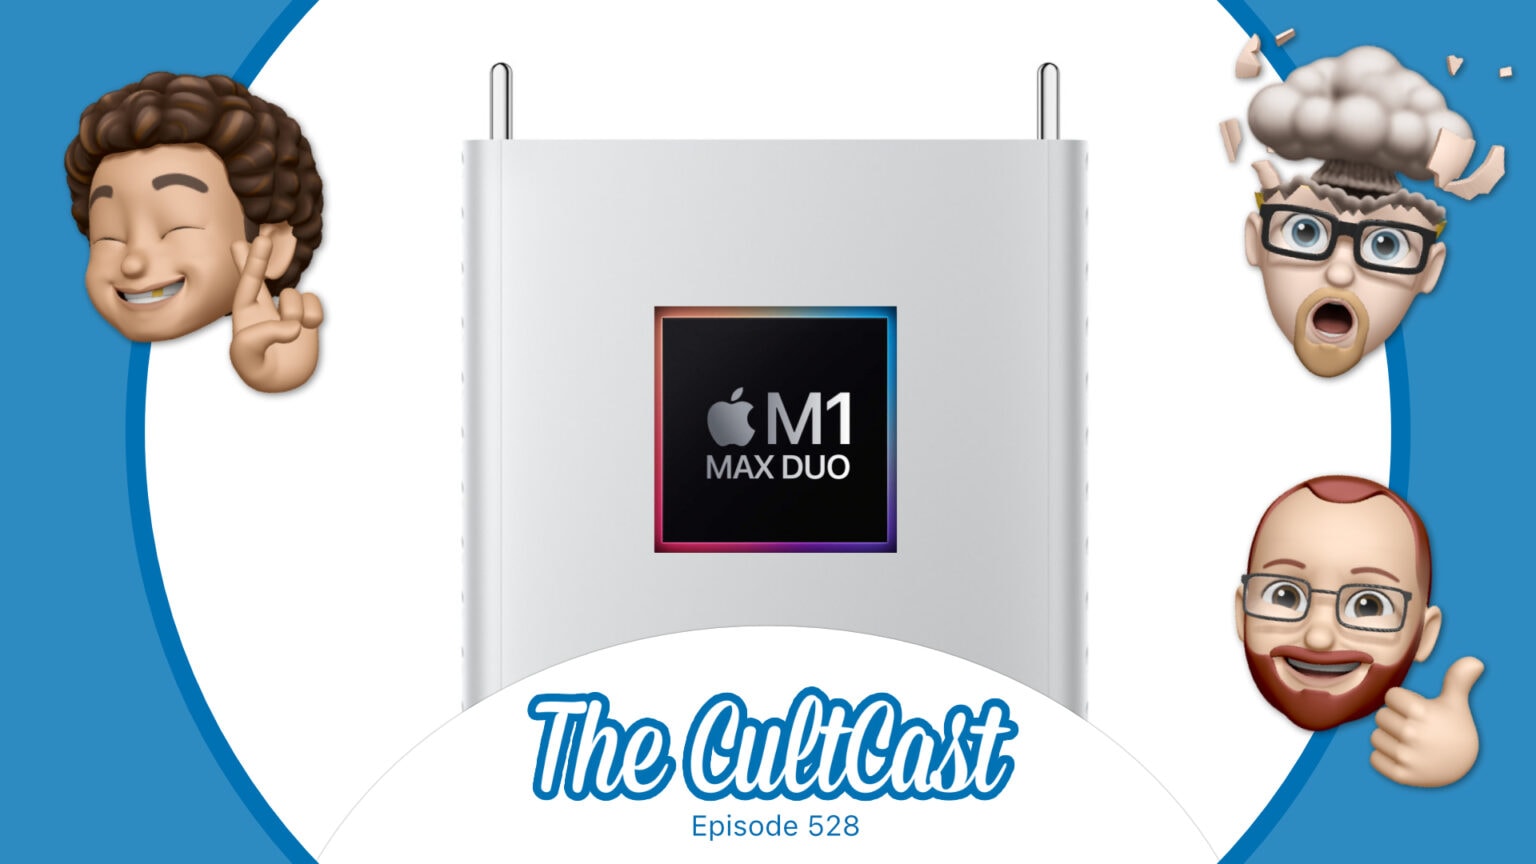 The CultCast: The next Mac Pro might get a monstrous chip.